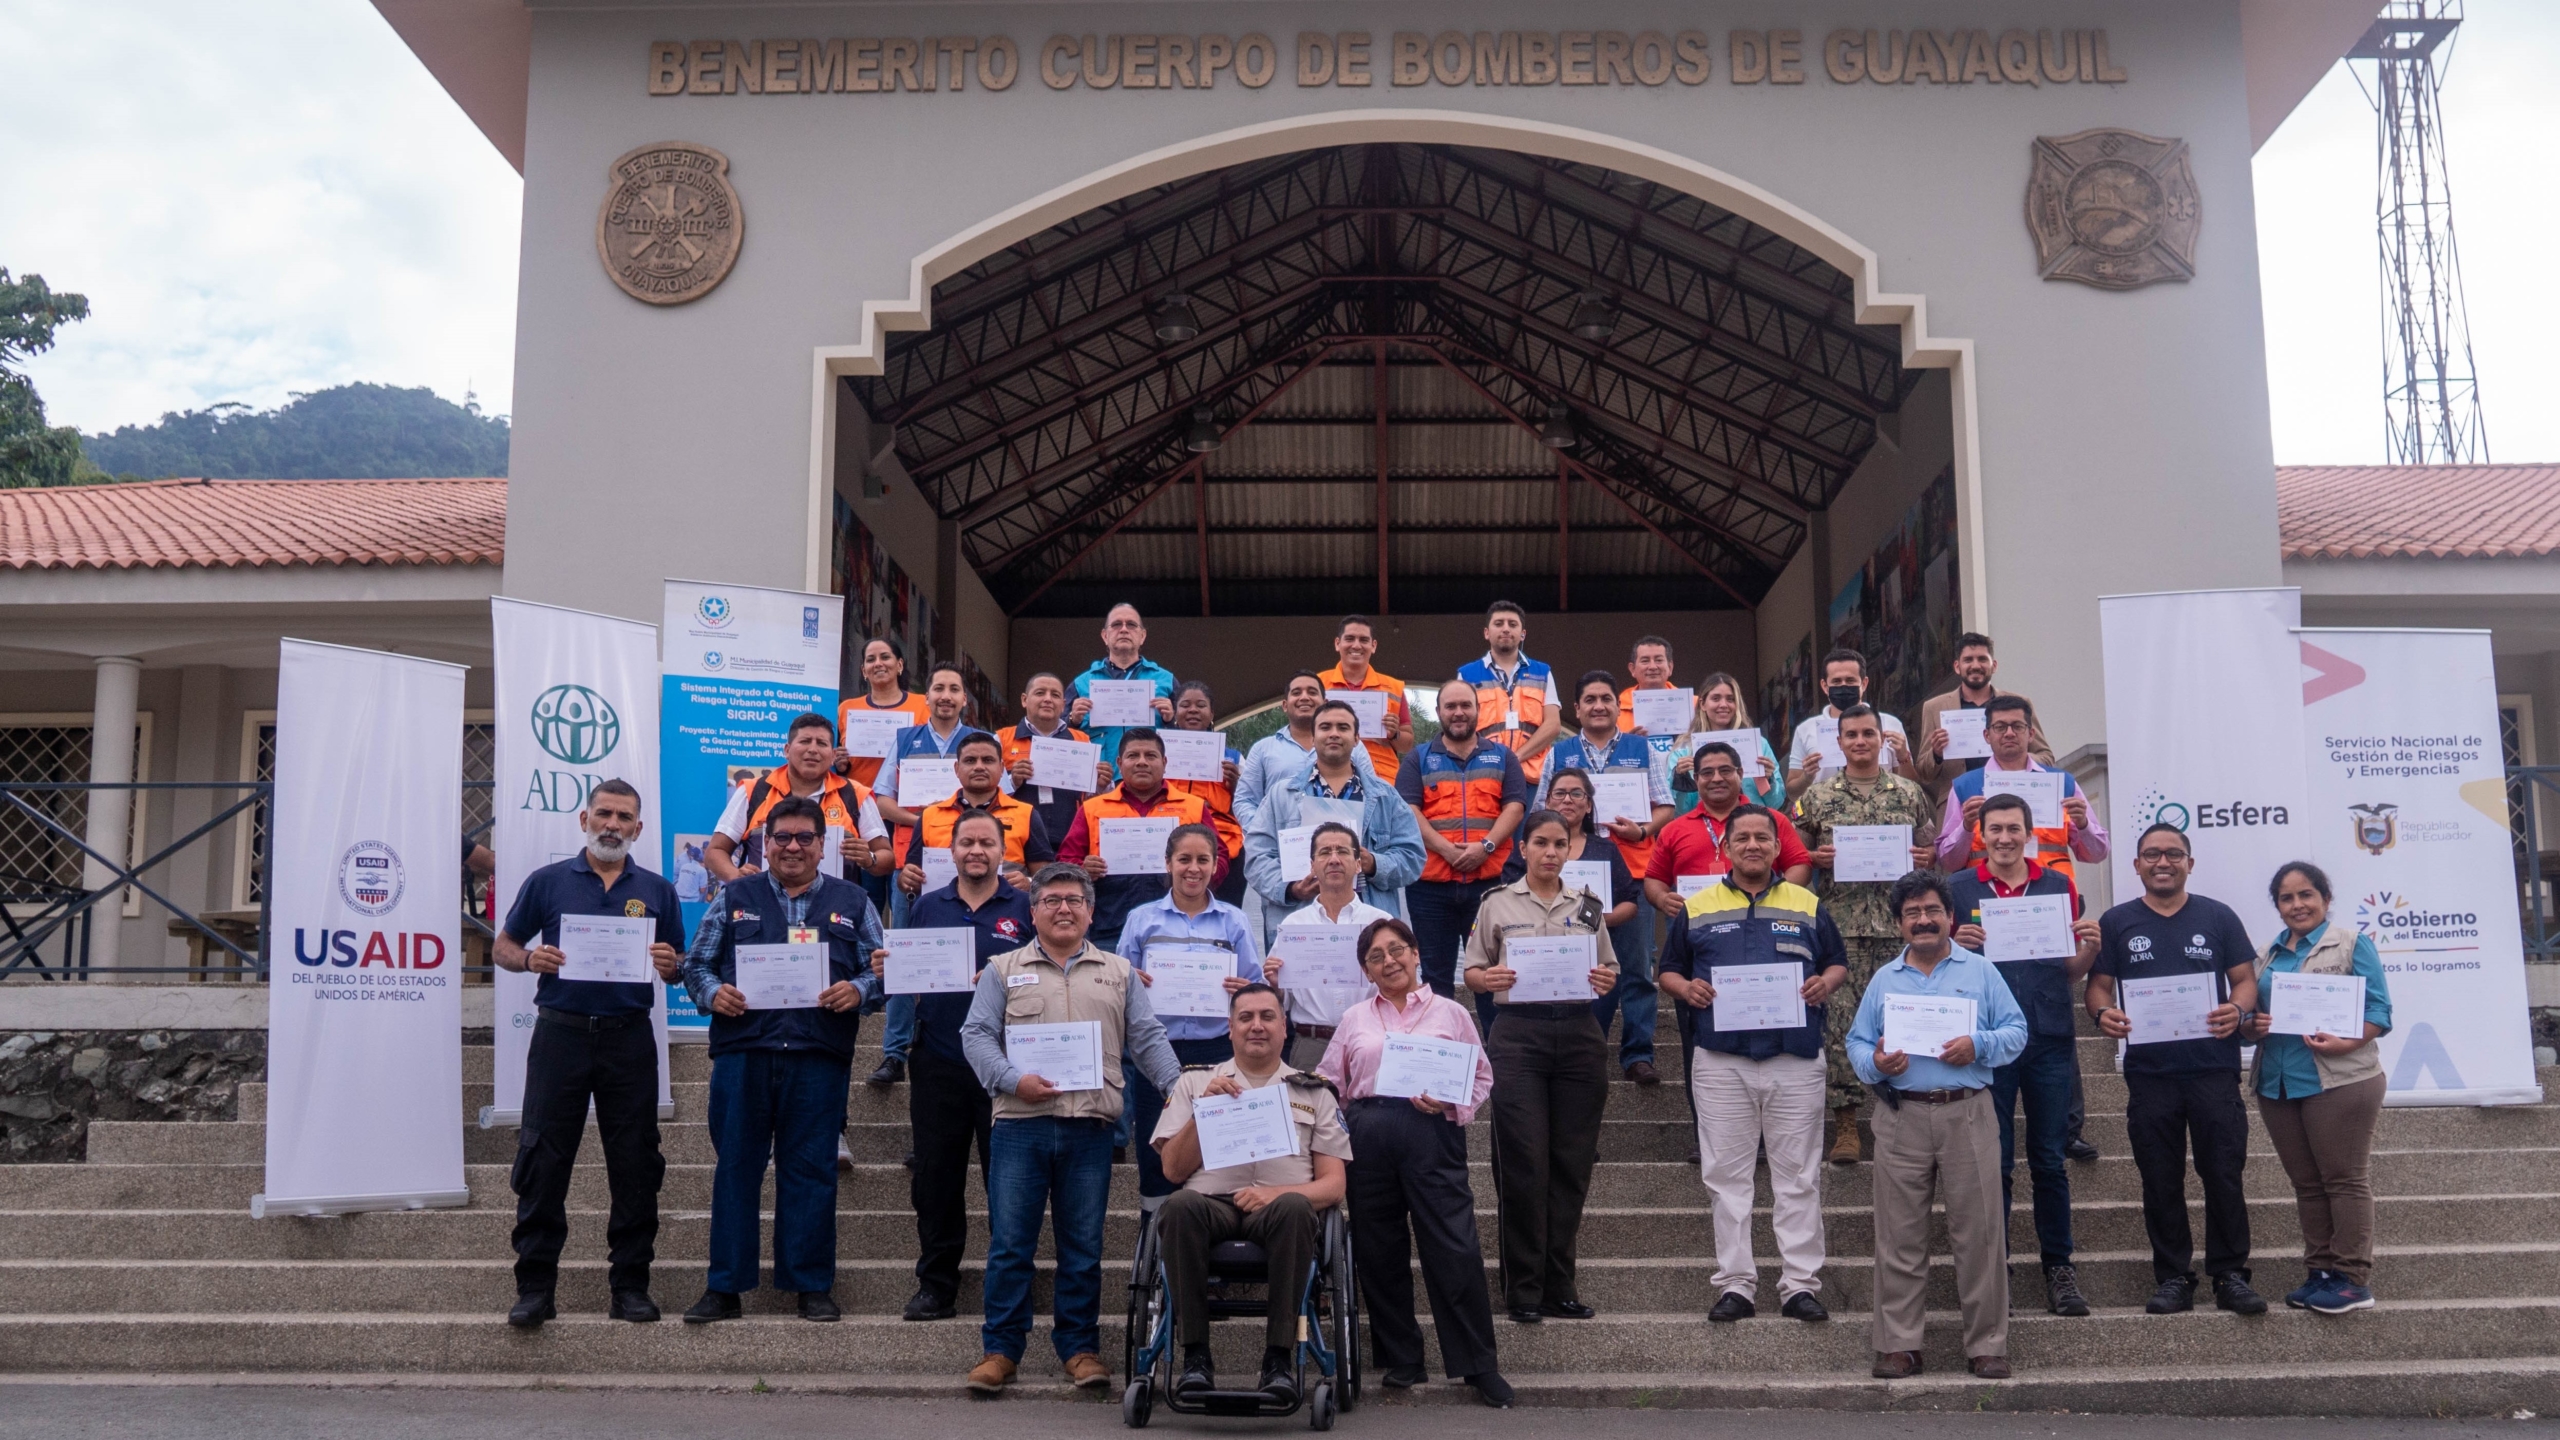 A group of 37 people holding certificates stand on the steps outside a building. One person is in a wheelchair. Rollup banners for USAID, ADRA and Sphere are visible. The letters on the building read “Benemerito Cuerpo de Bomberos de Guayaquil”